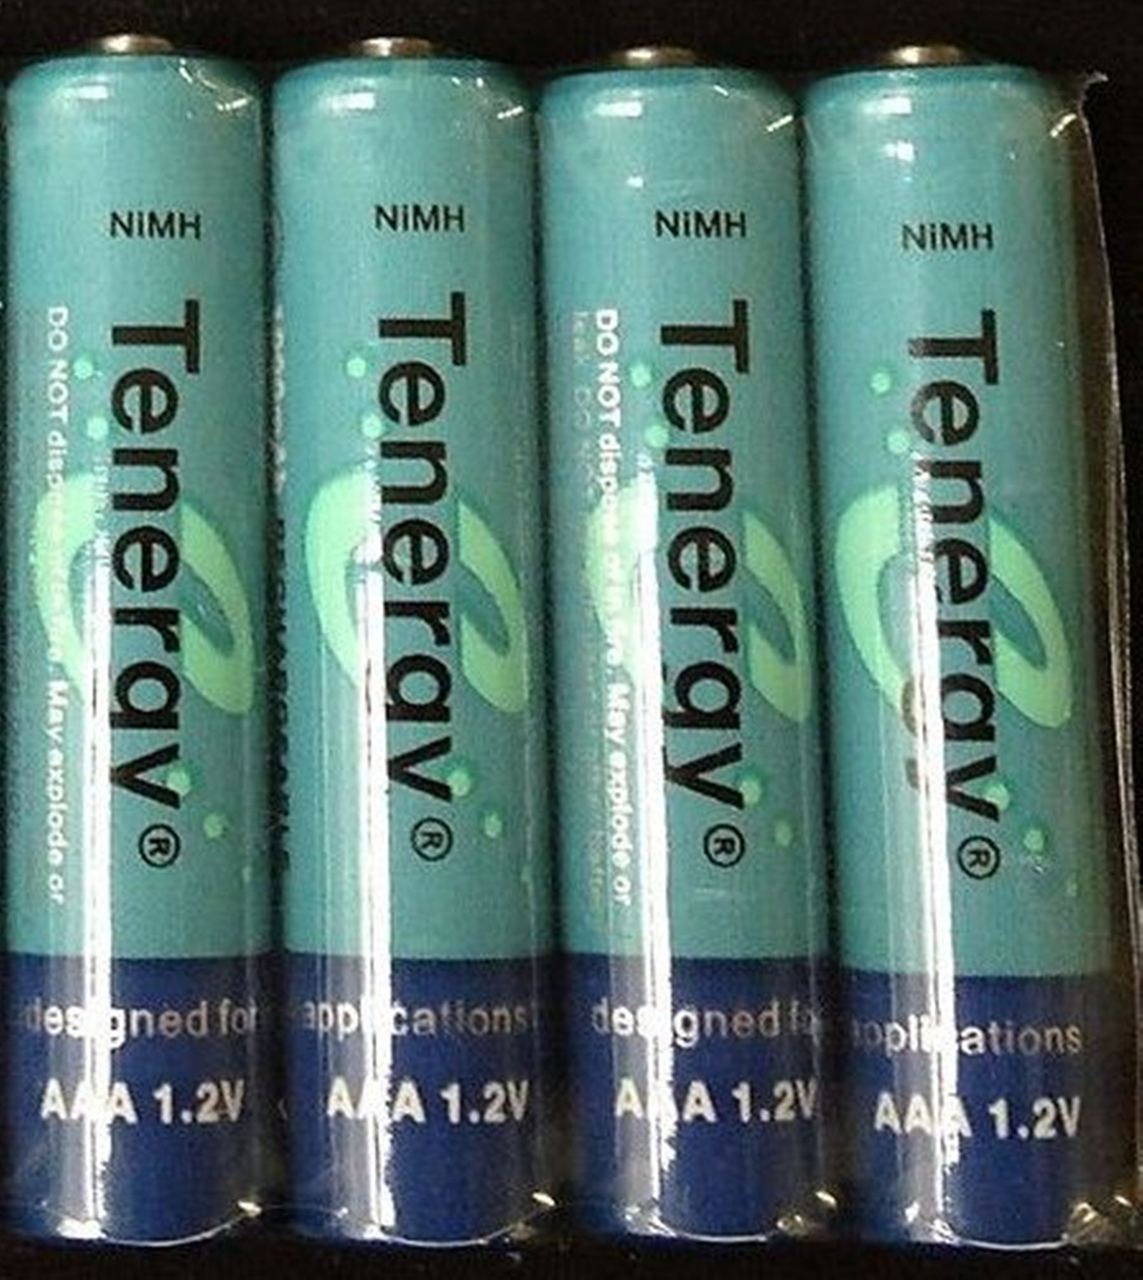 Tenergy 1000mAh AAA 1.2V NiMH Rechargeable Batteries - 4 Pack + FREE SHIPPING!